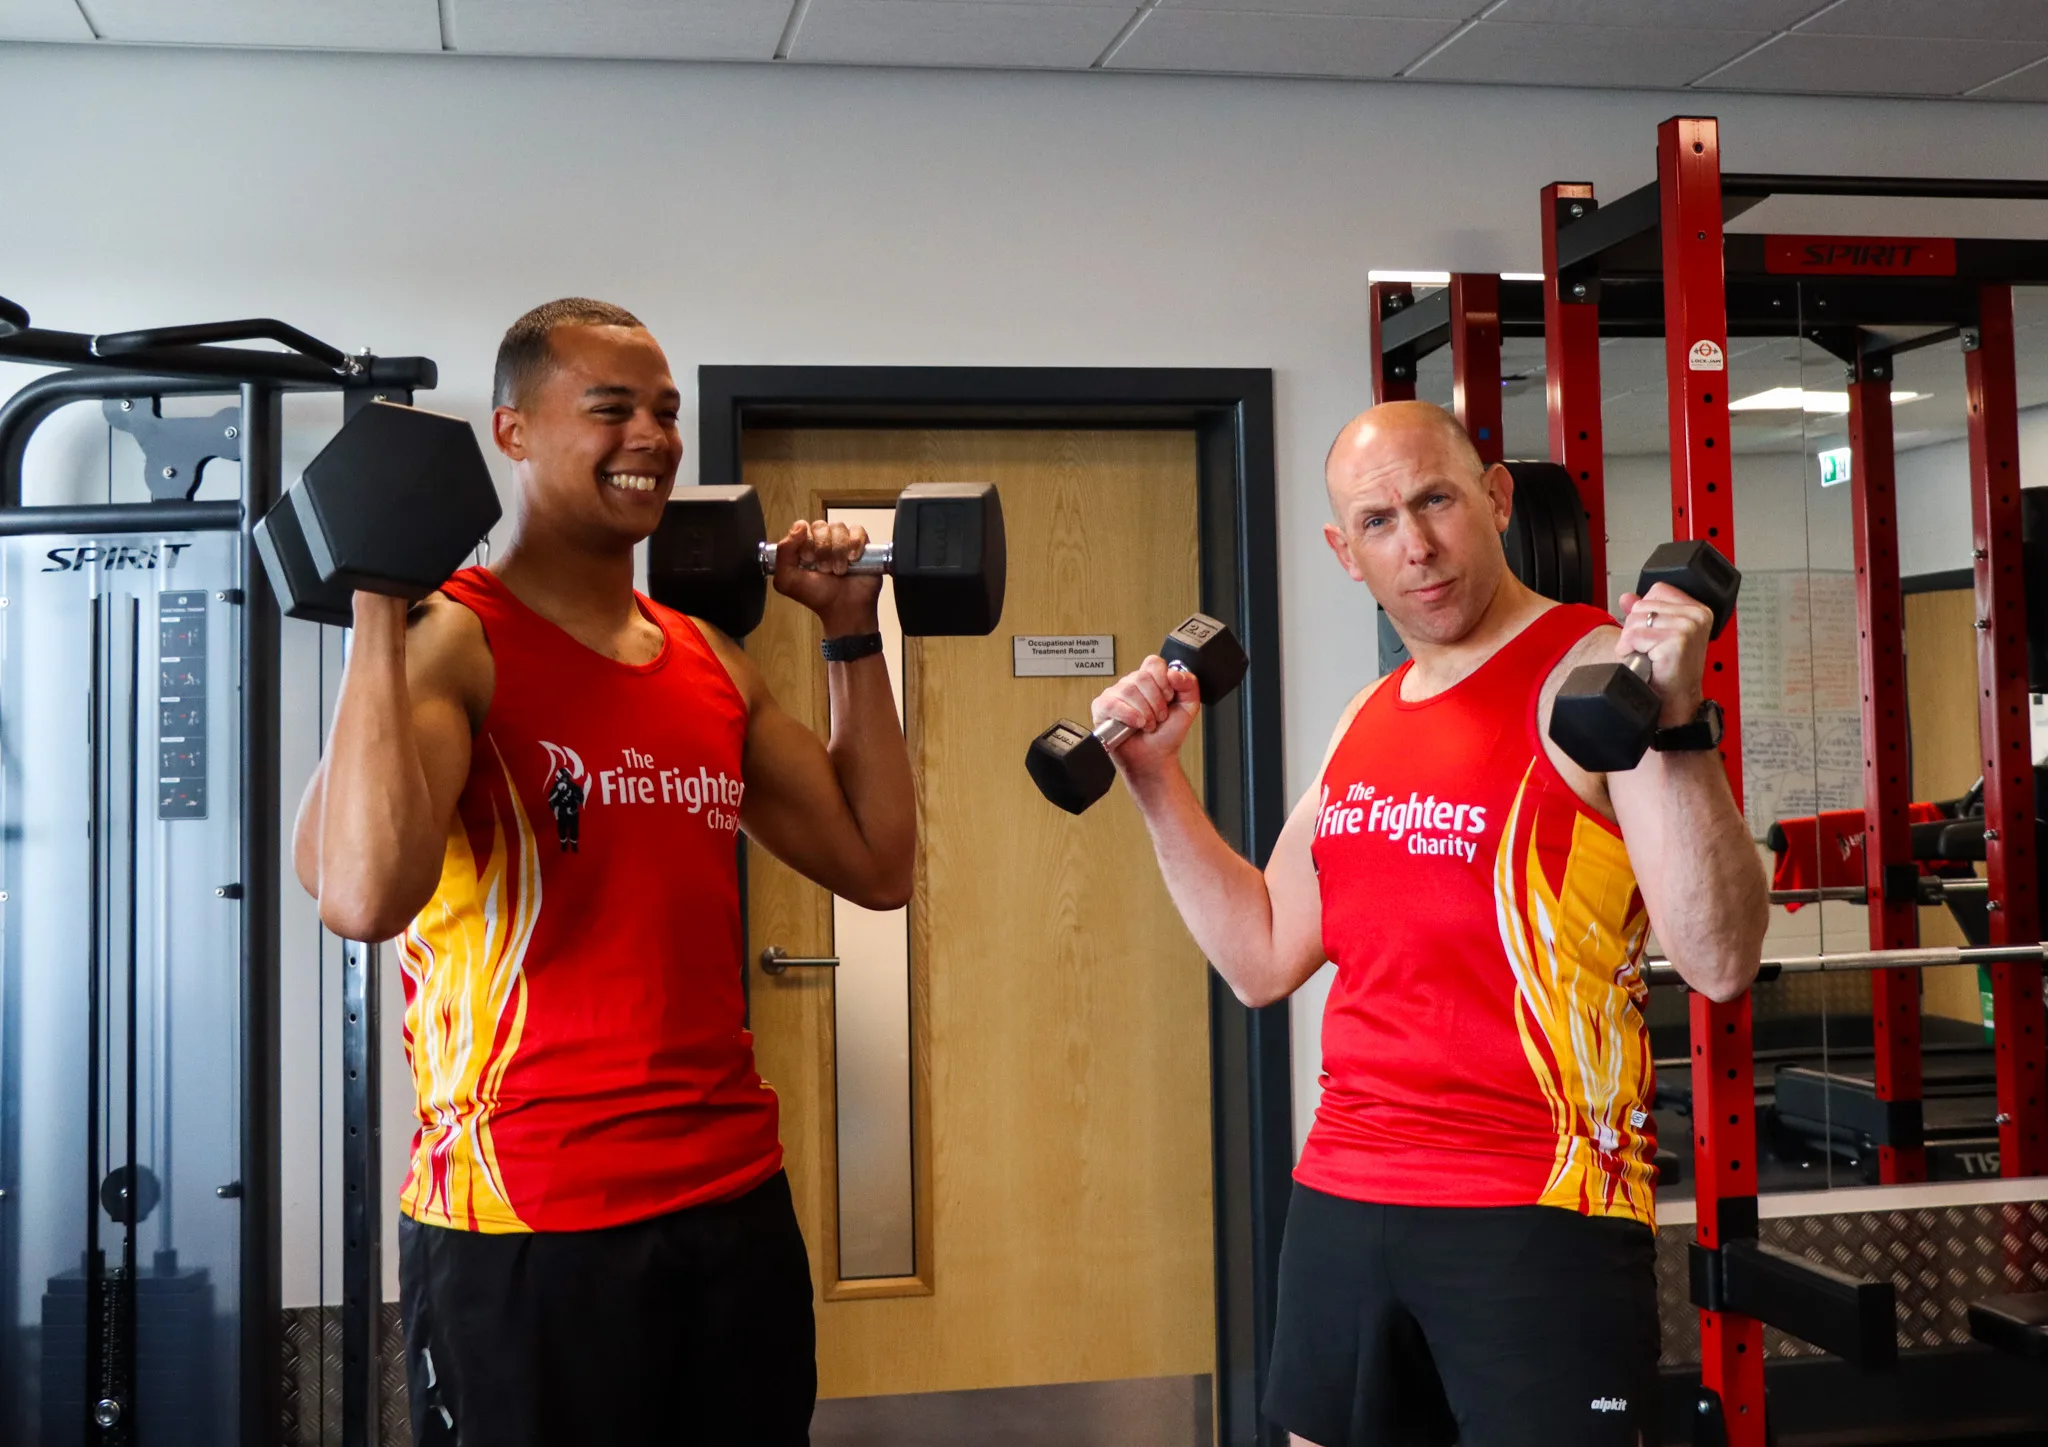 On Monday 1st May 2023, Firefighters Matt Woody Woodcock and Jordan Cadogan from Cambridgeshire Fire & Rescue Service will undertake a 50 Mile Ultra-Marathon To Raise Money For The Fire Fighters Charity.